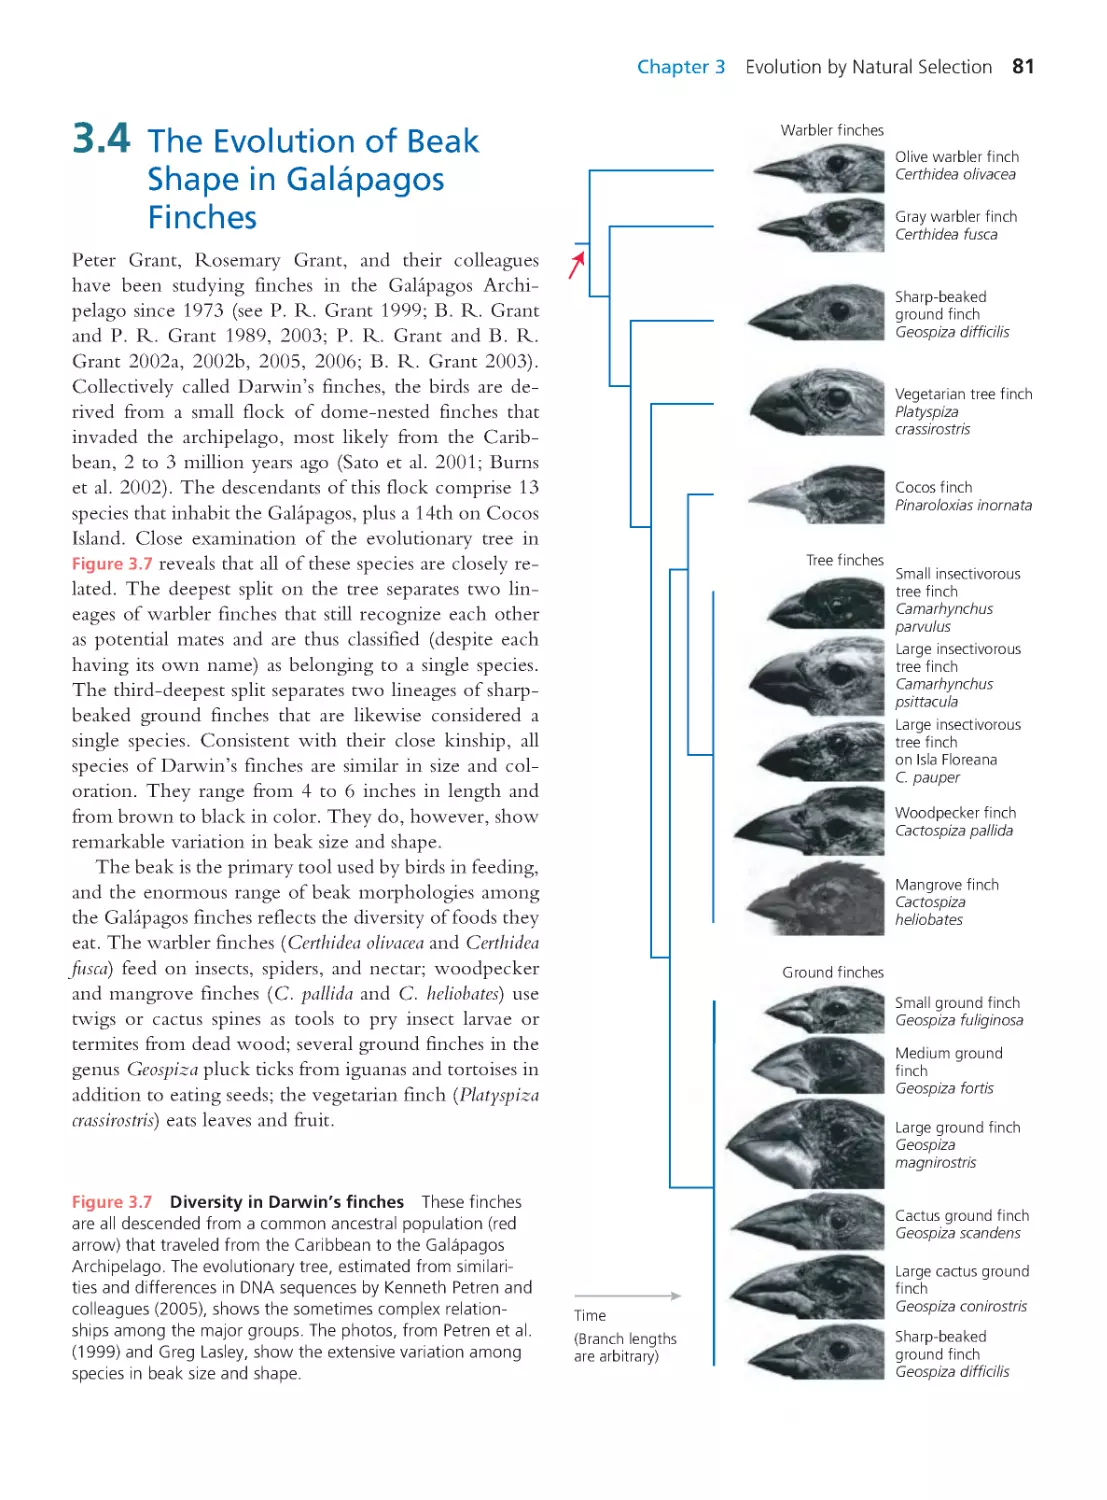 3.4 The Evolution of Beak Shape in Galápagos Finches